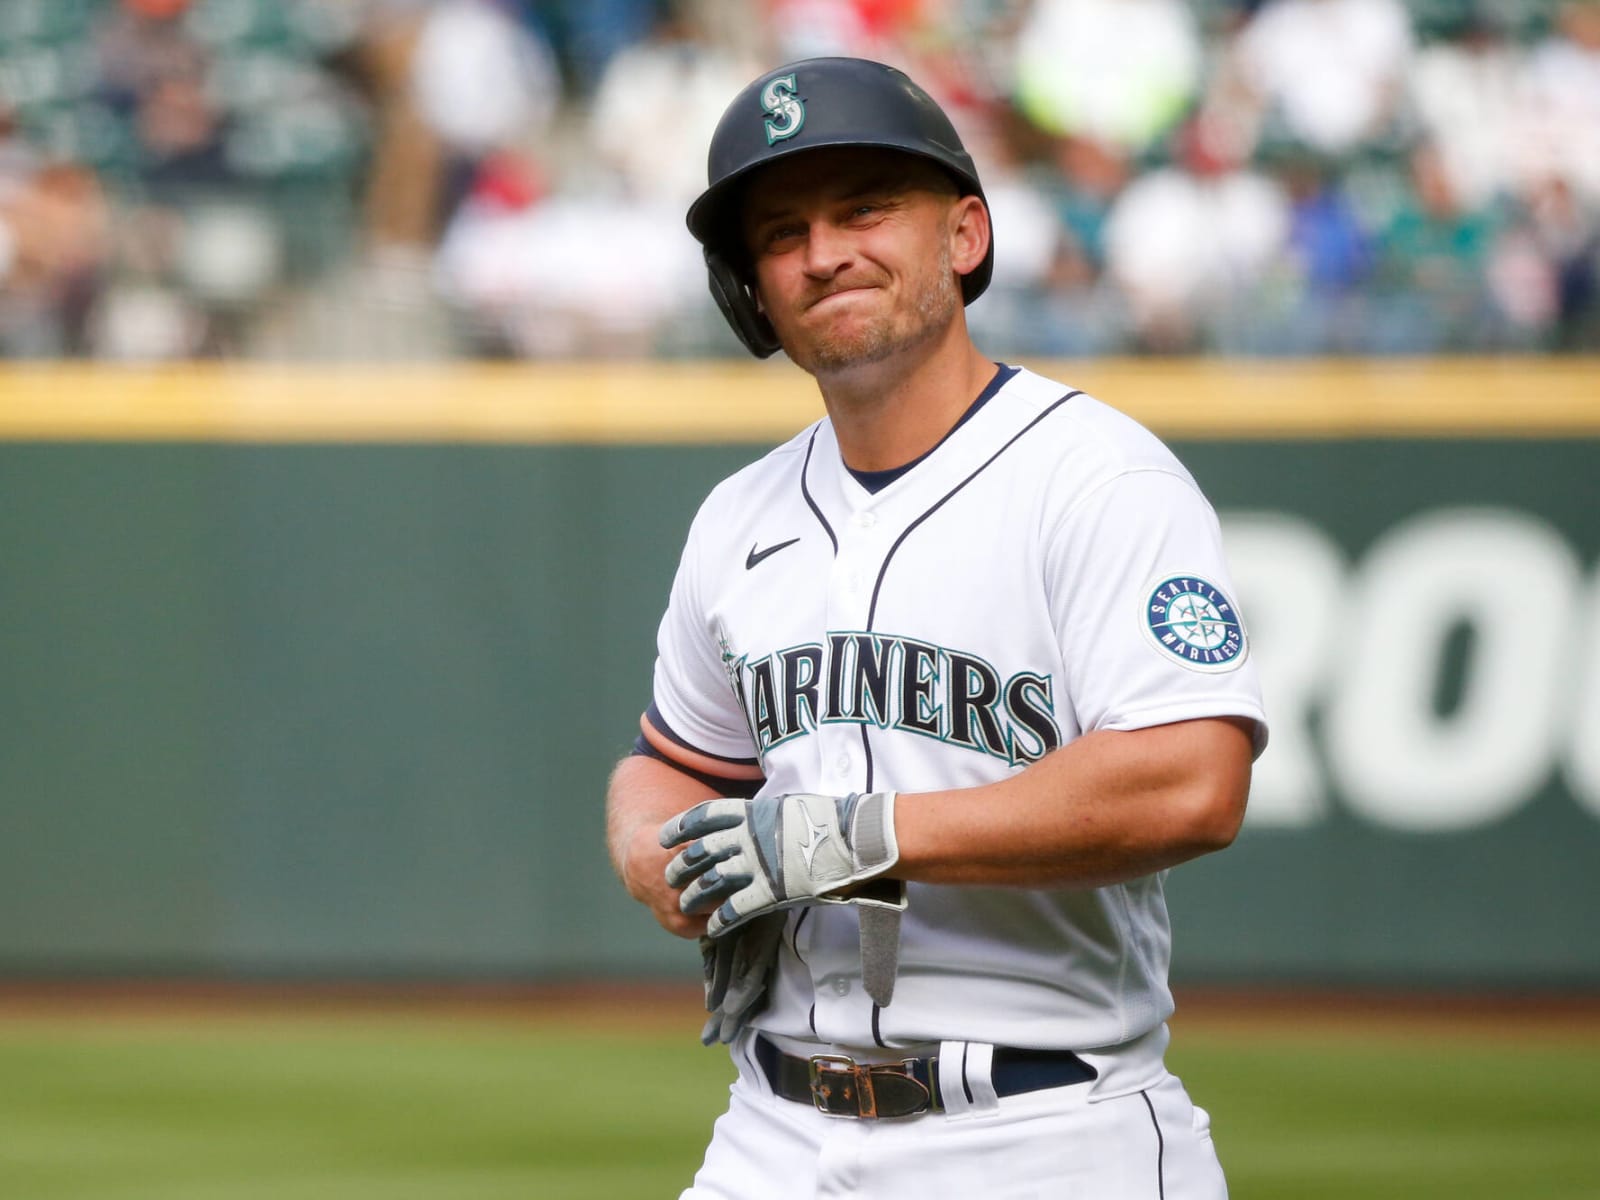 A Grip on Sports: Kyle Seager's retirement harkens back to a time